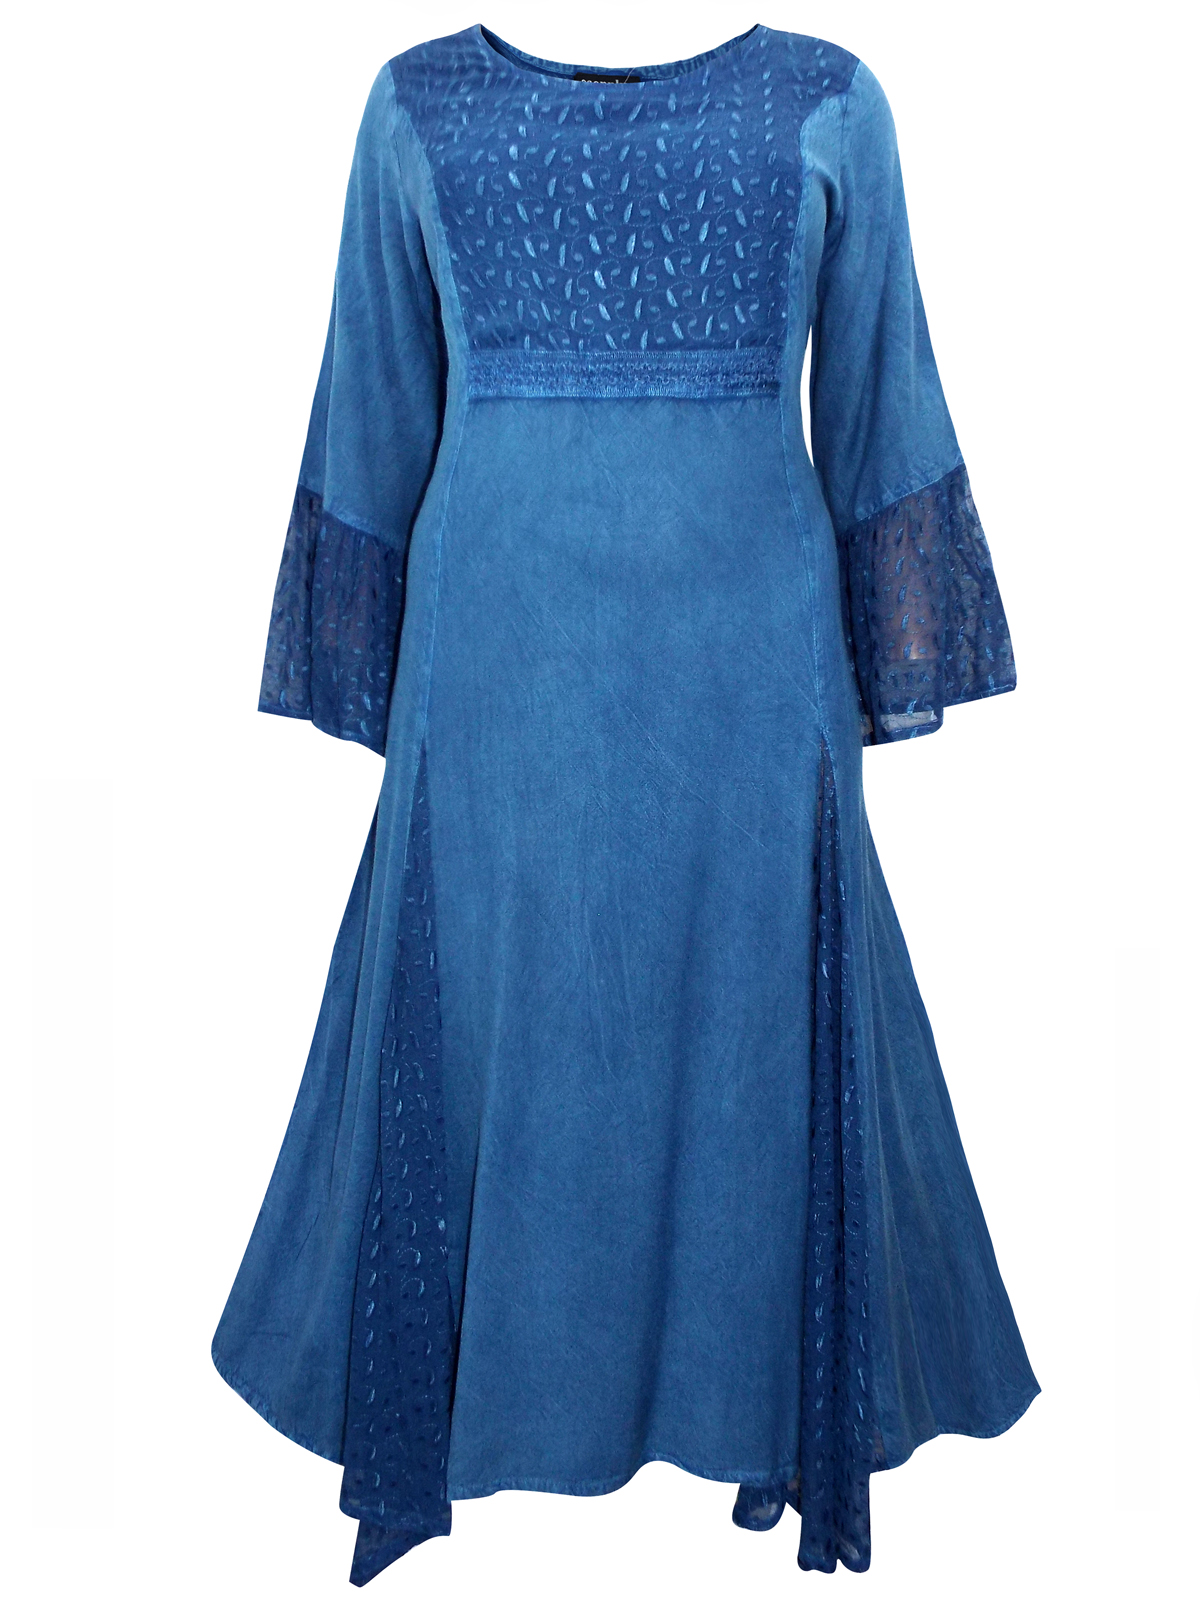 eaonplus ANTIQUE-BLUE Embroidered Panelled Bell Sleeve Dress - Plus ...